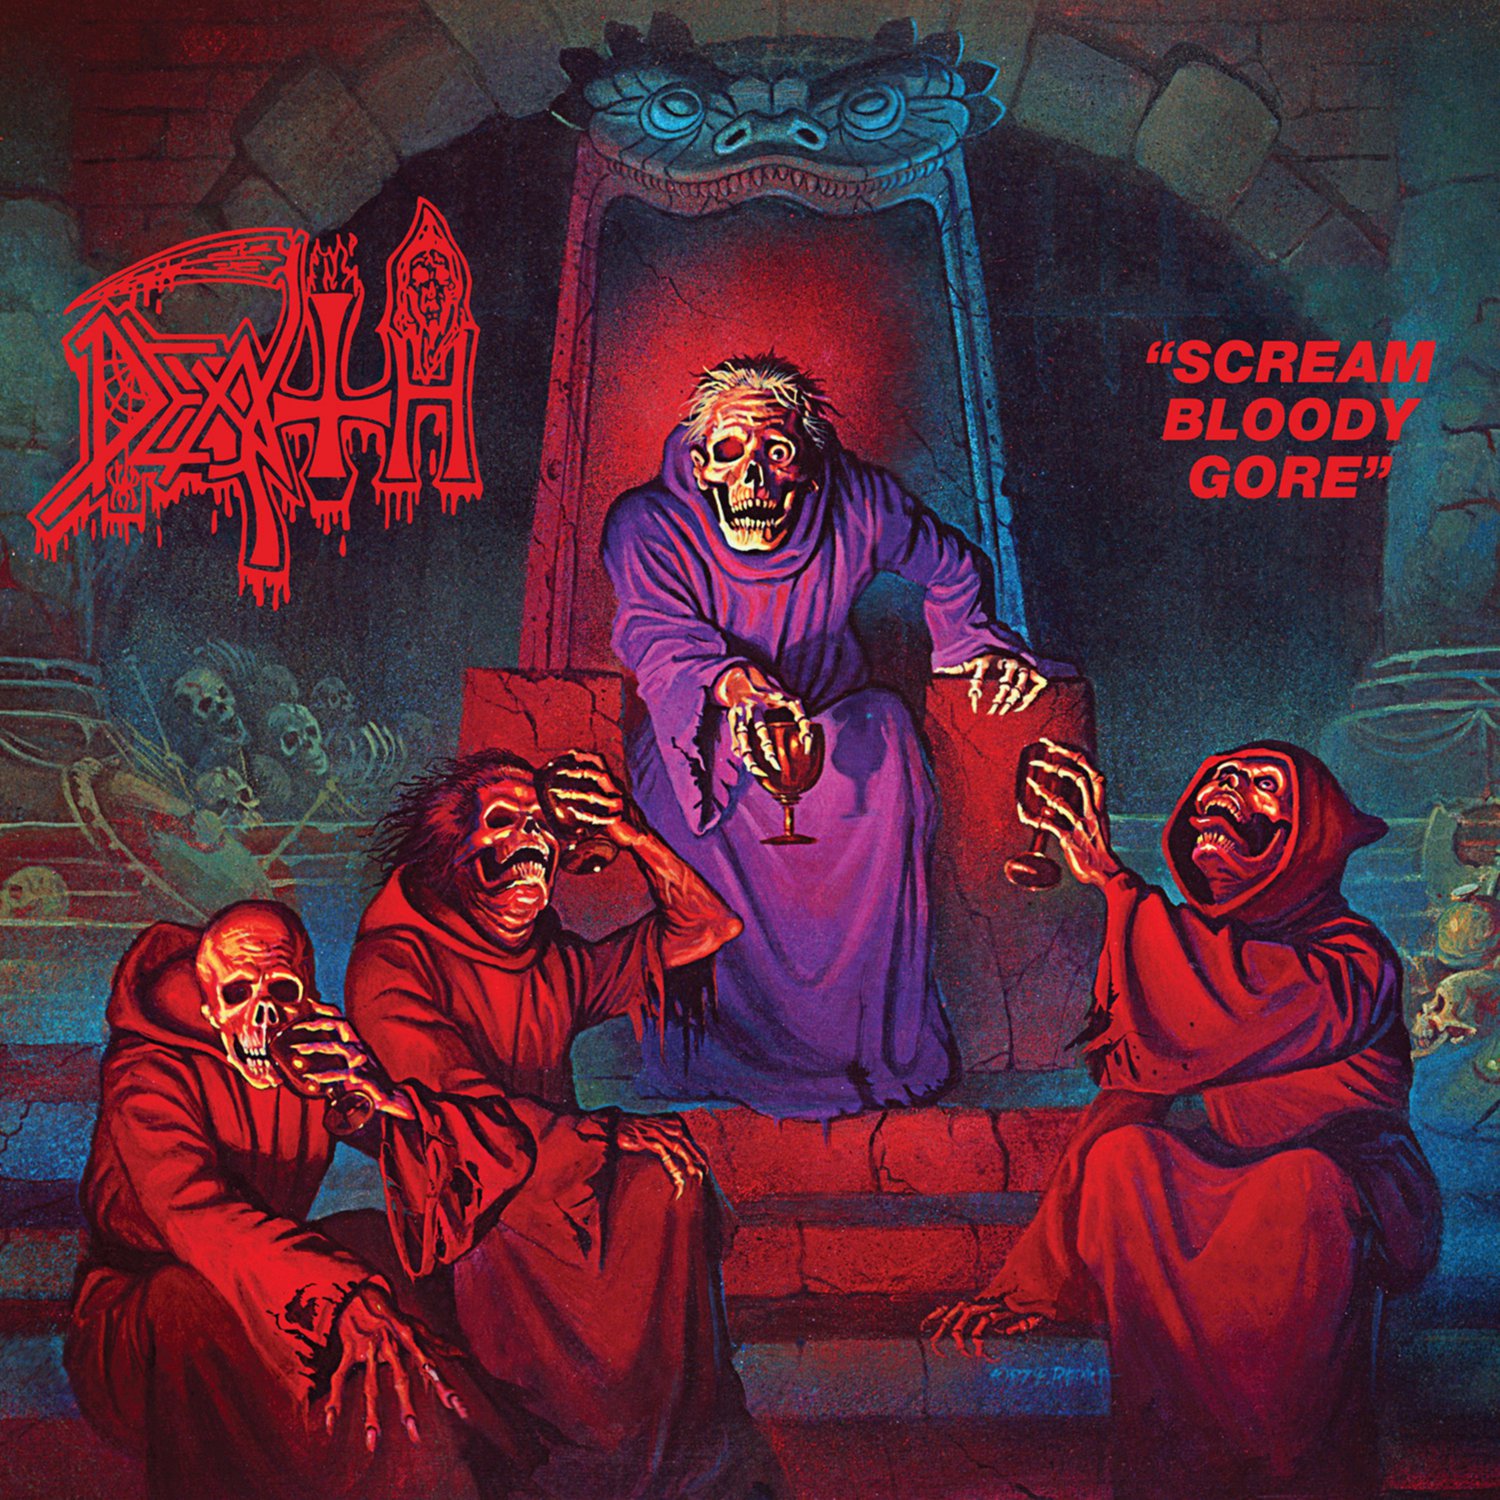 DEATH Scream Bloody Gore BANNER Huge 4X4 Ft Fabric Poster Tapestry Flag Print album cover art